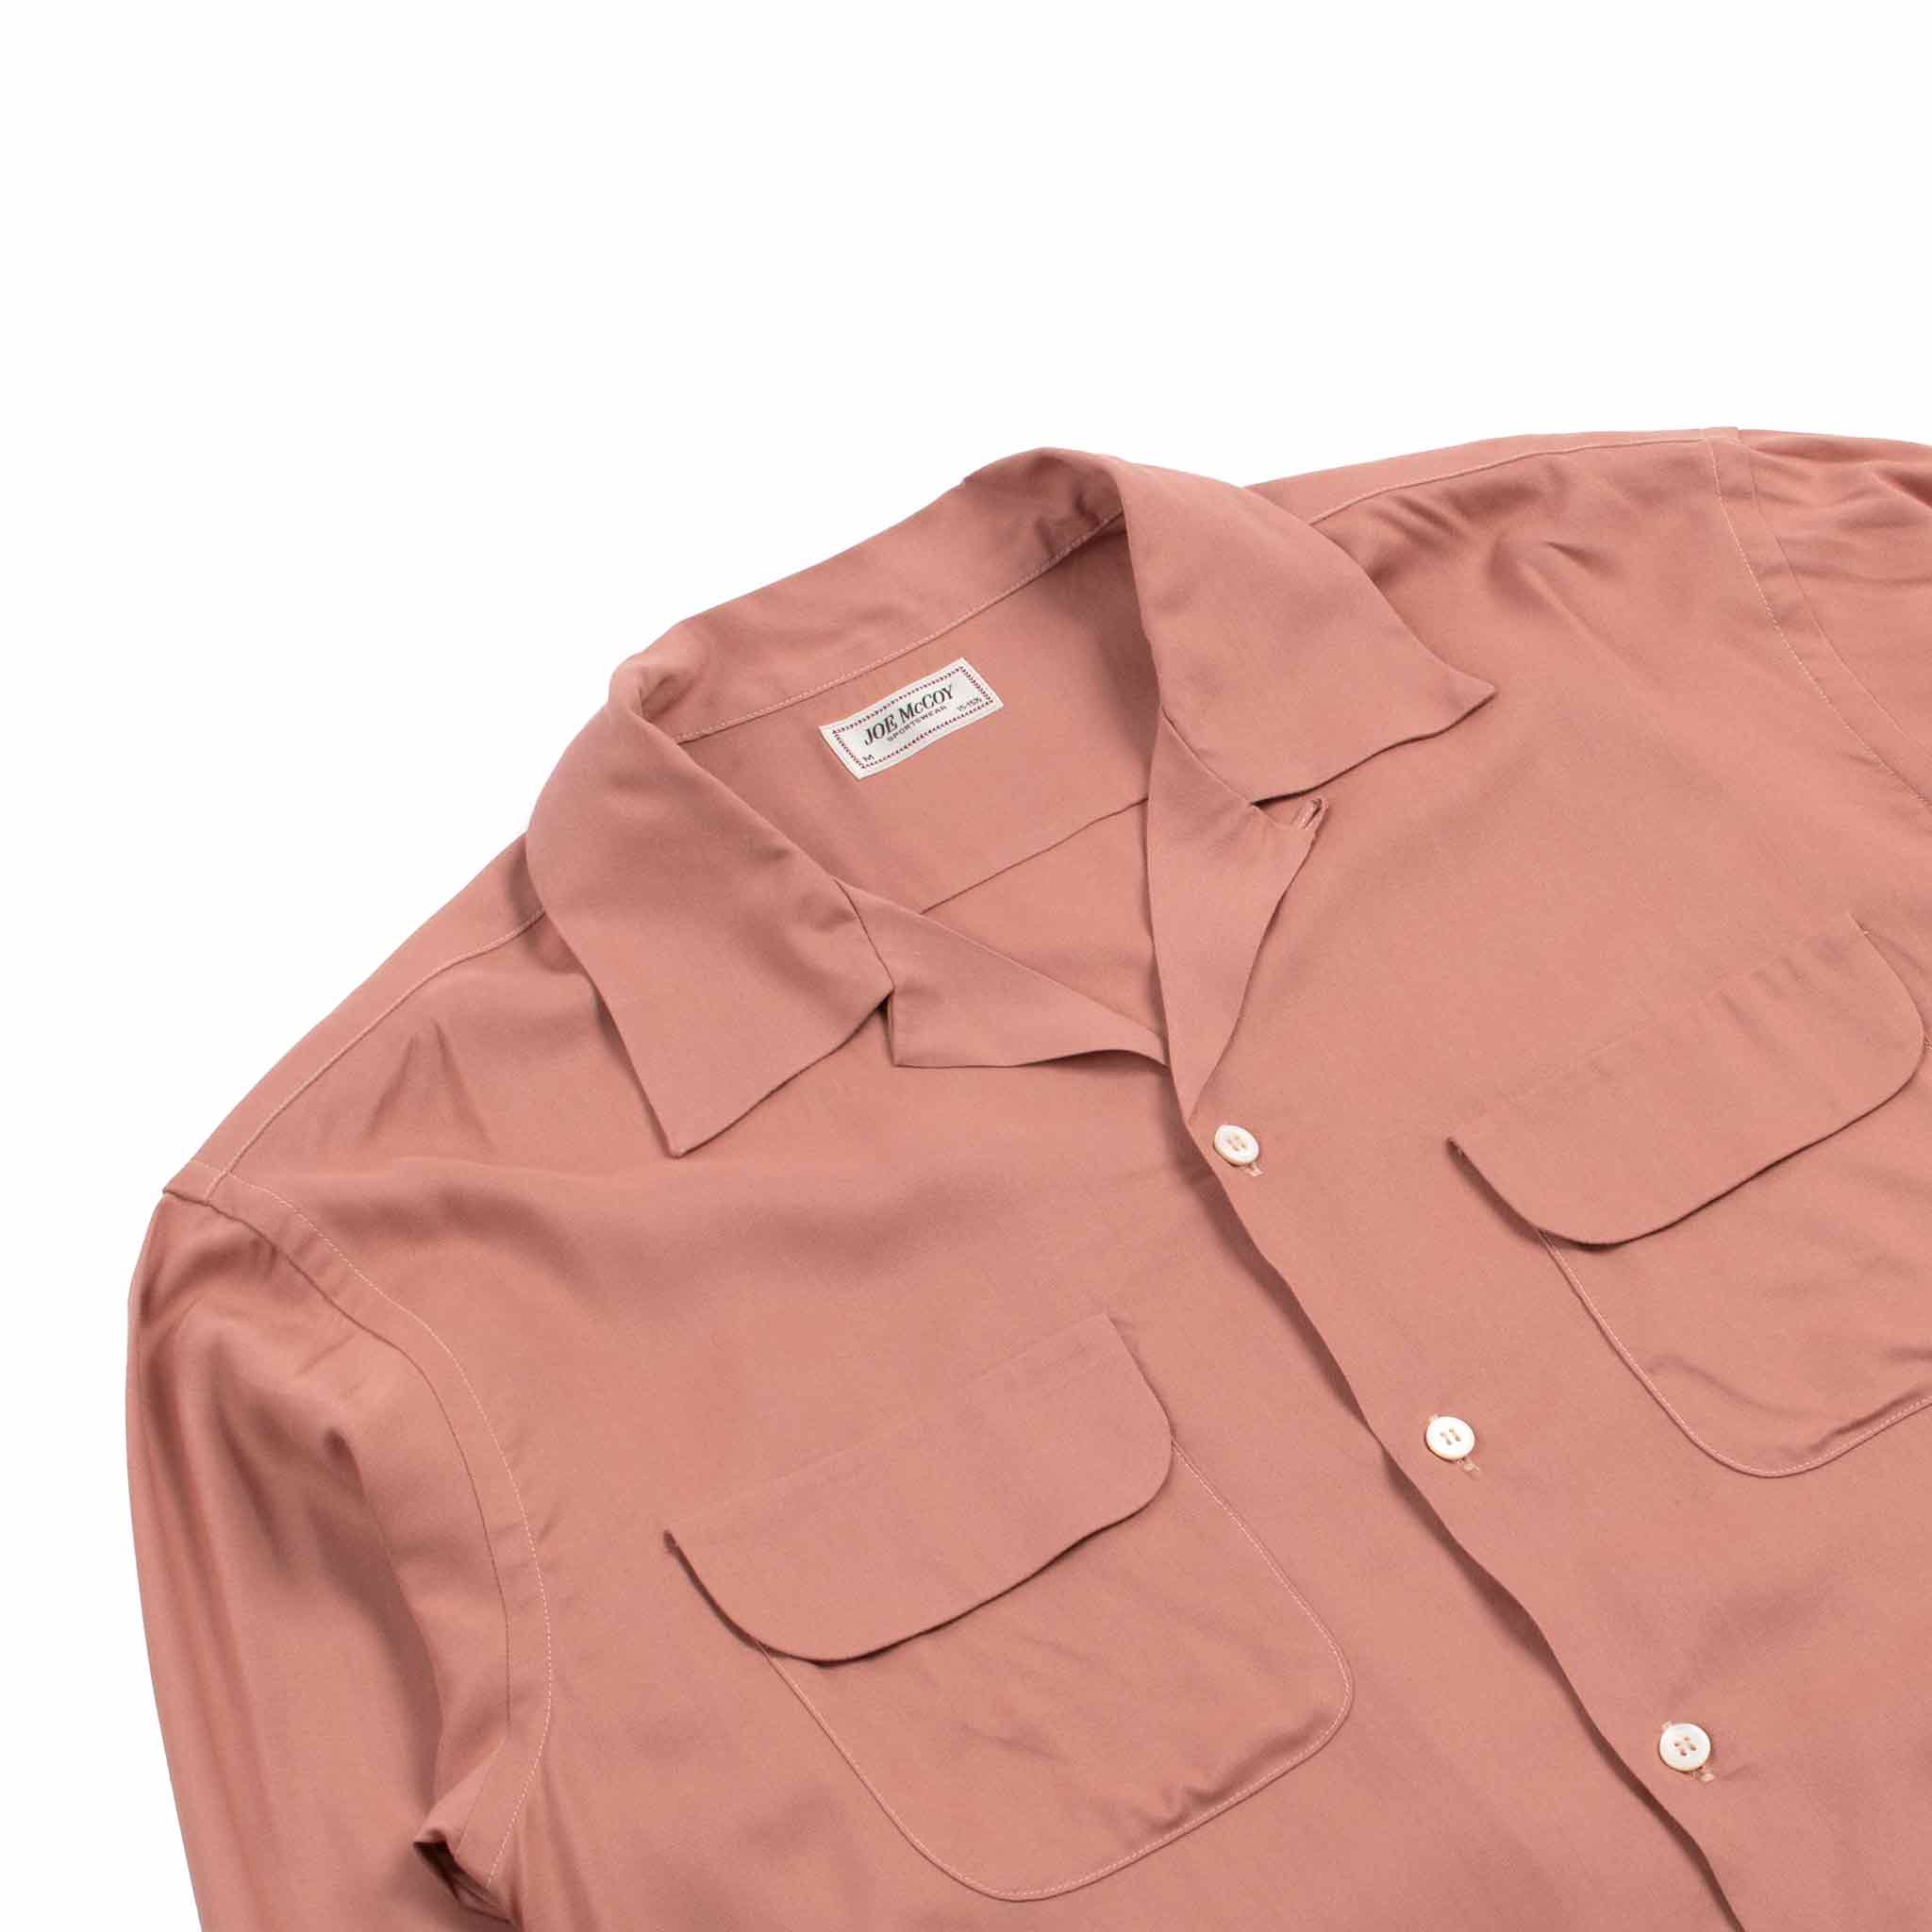 The Real McCoy's MS21009 Open Collar Rayon Shirt Pink